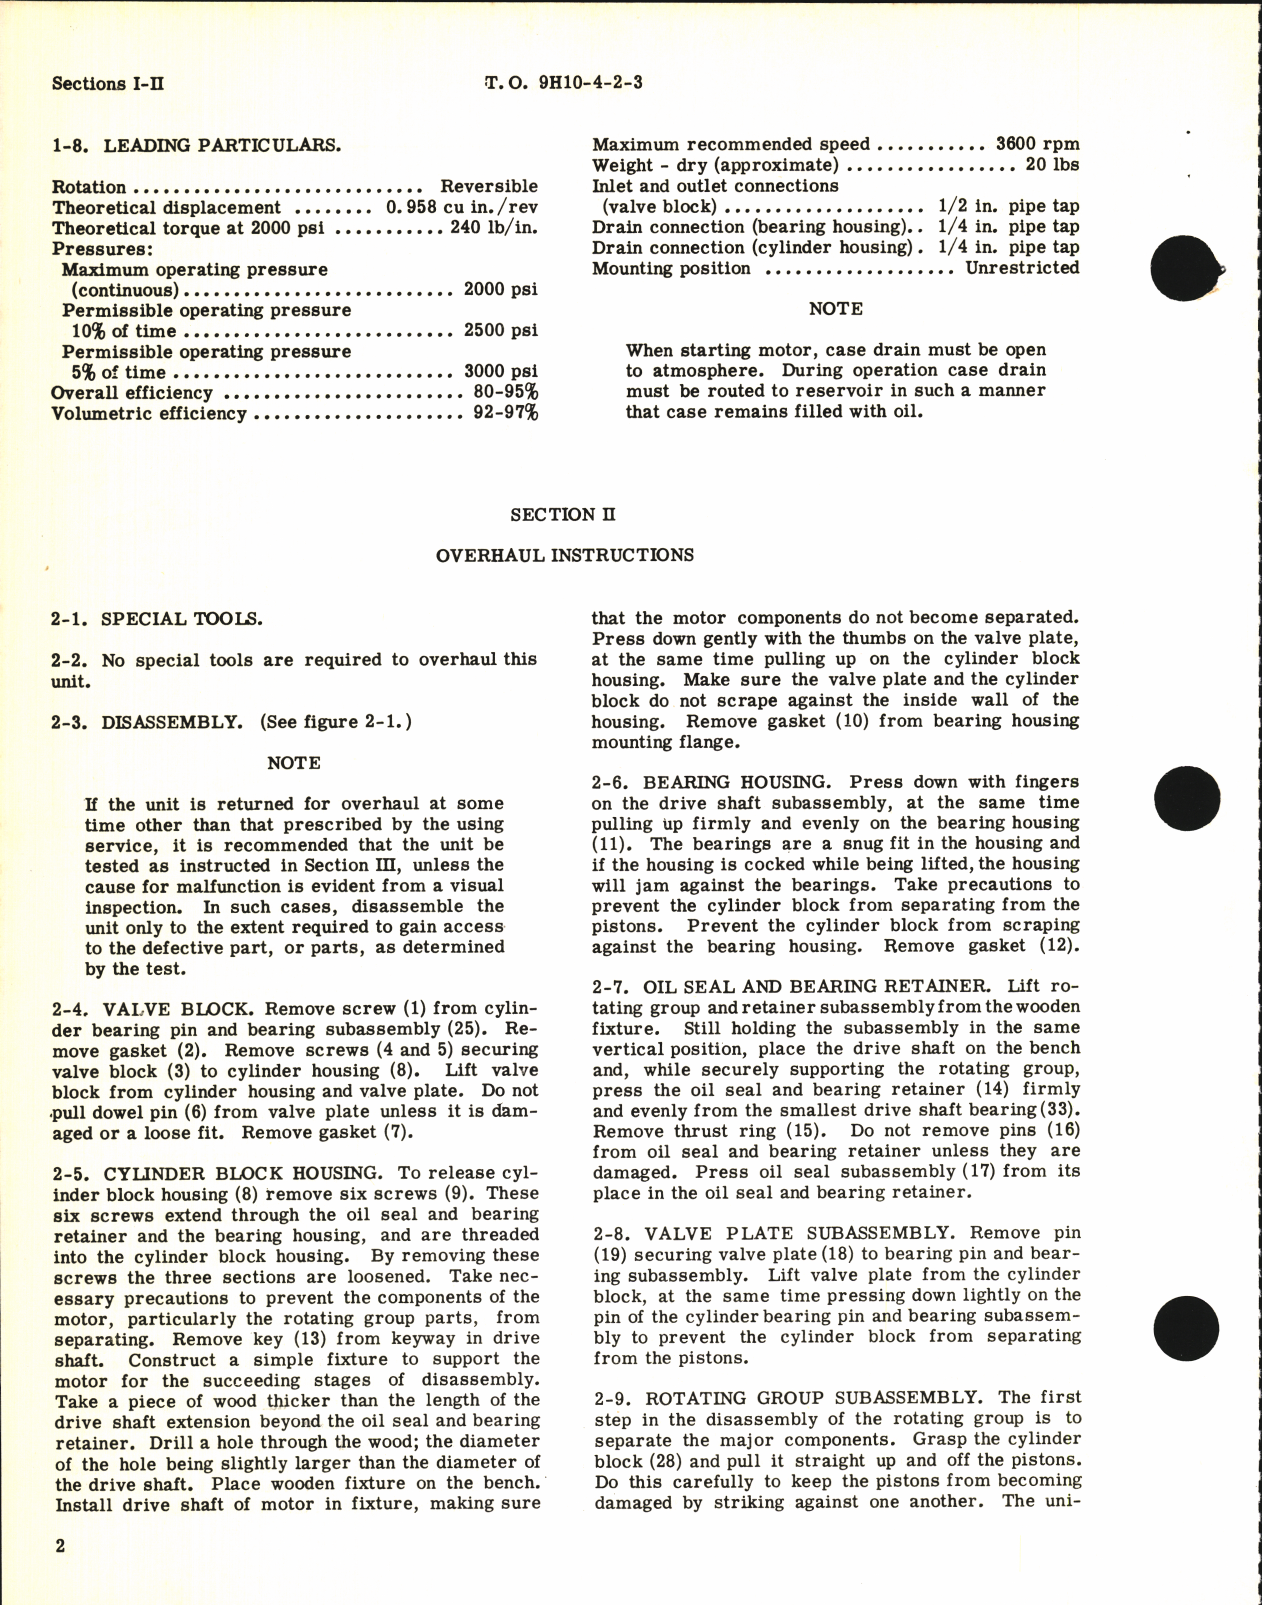 Sample page 6 from AirCorps Library document: Handbook of Overhaul Instructions for Hydraulic Motor Assembly 